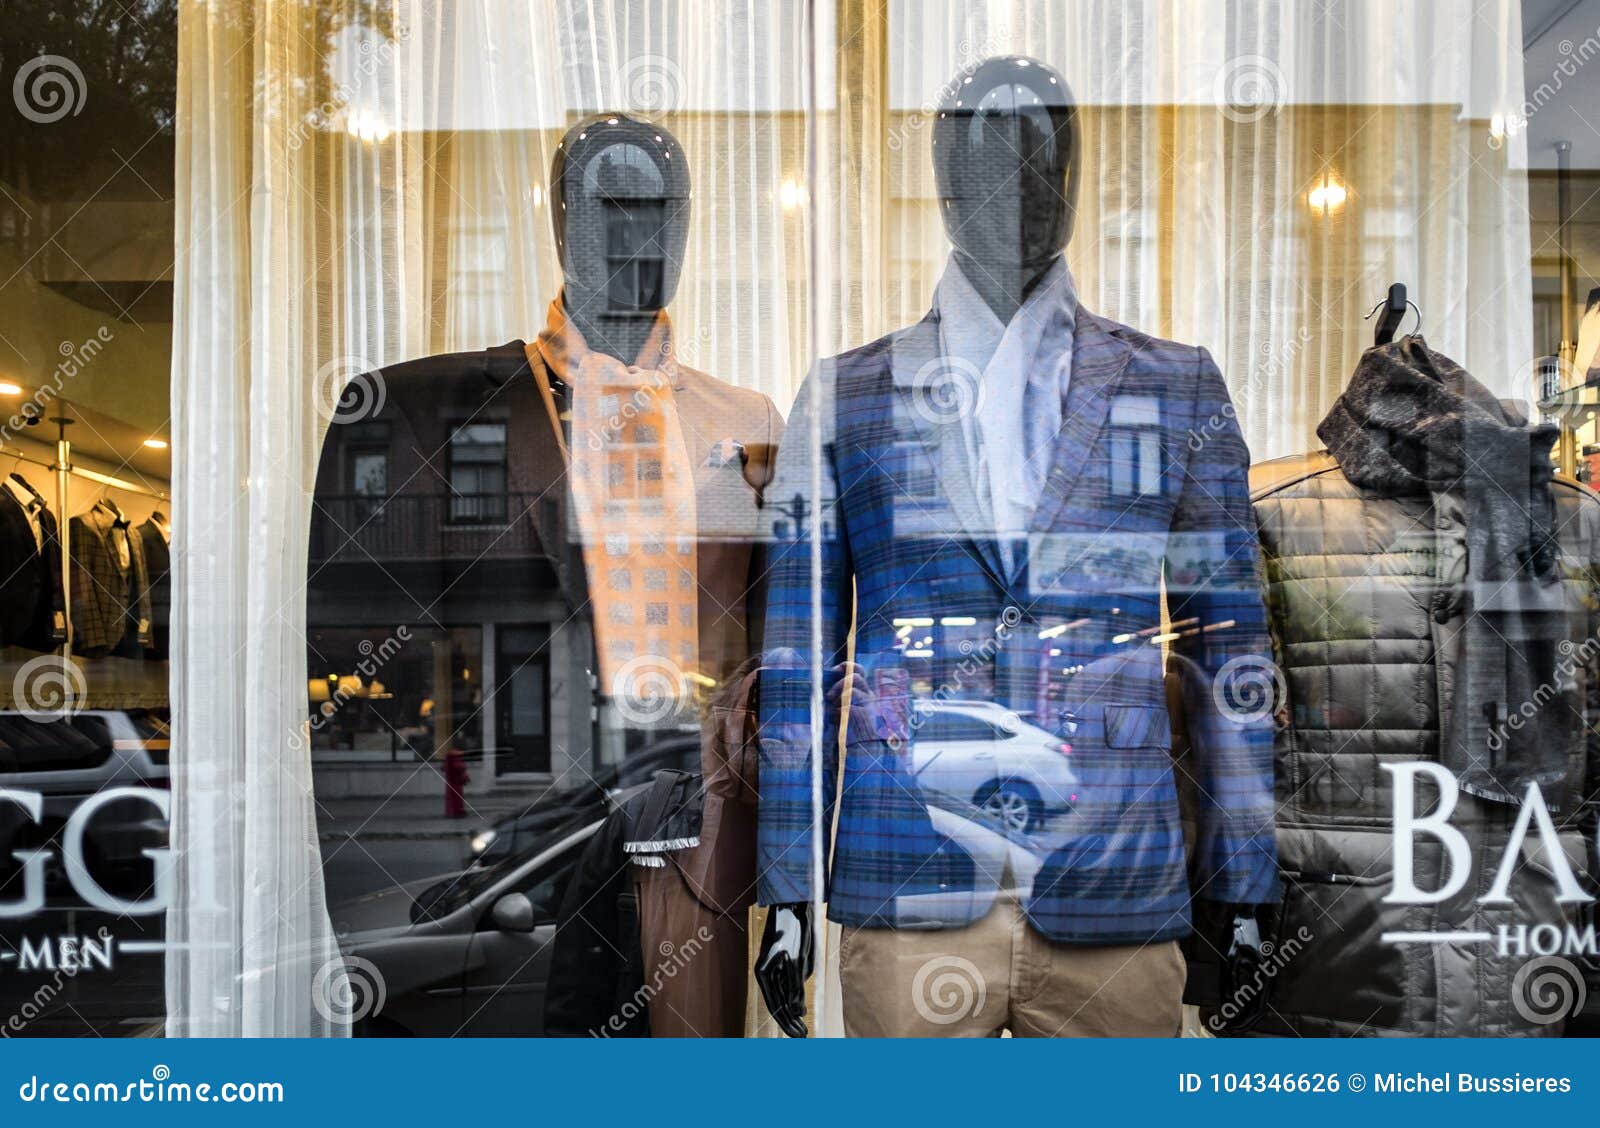 Mens Fashion Mannequin Display Stock Photo - Image of clothes, business ...